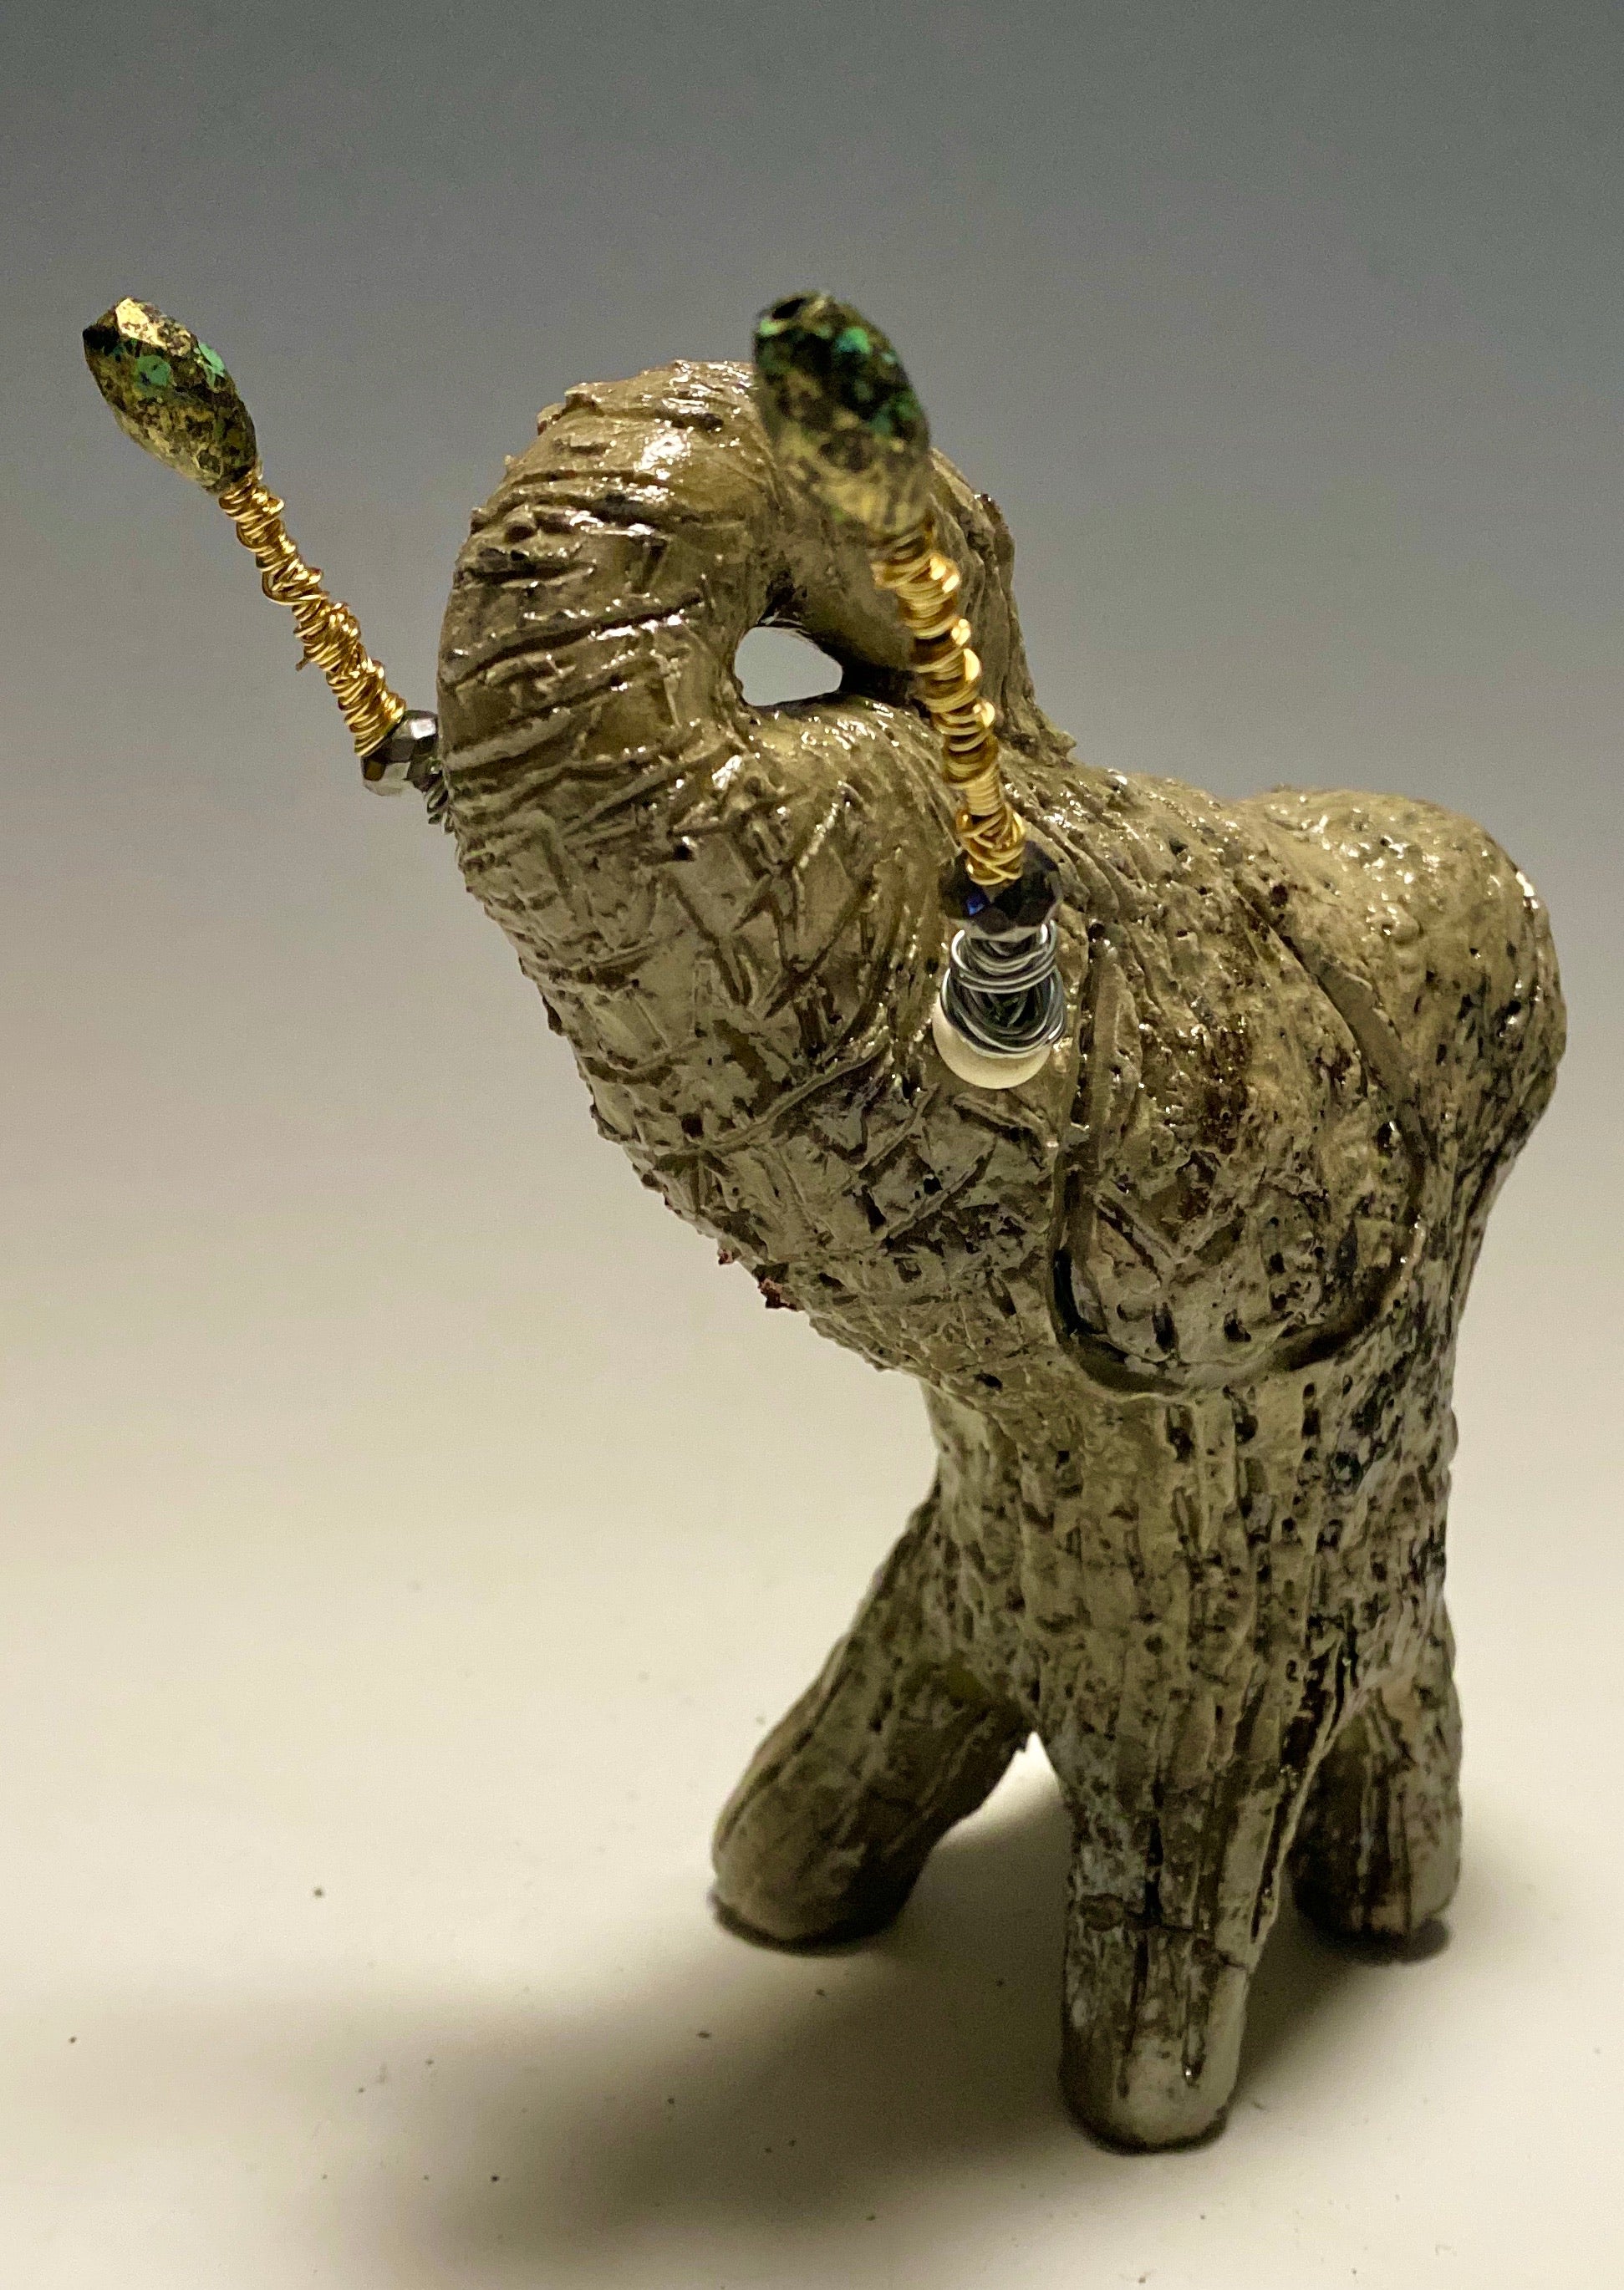 Raku Elephant Have you HERD!!!!!!  Just one of these lovely Raku Fired Elephant will make an excellent gift for your  friend, sorority or for your home’ special place centerpiece.   6" x 3" x 4" 1.3 lbs Beautiful metallic white raku elephant For decorative purposely only